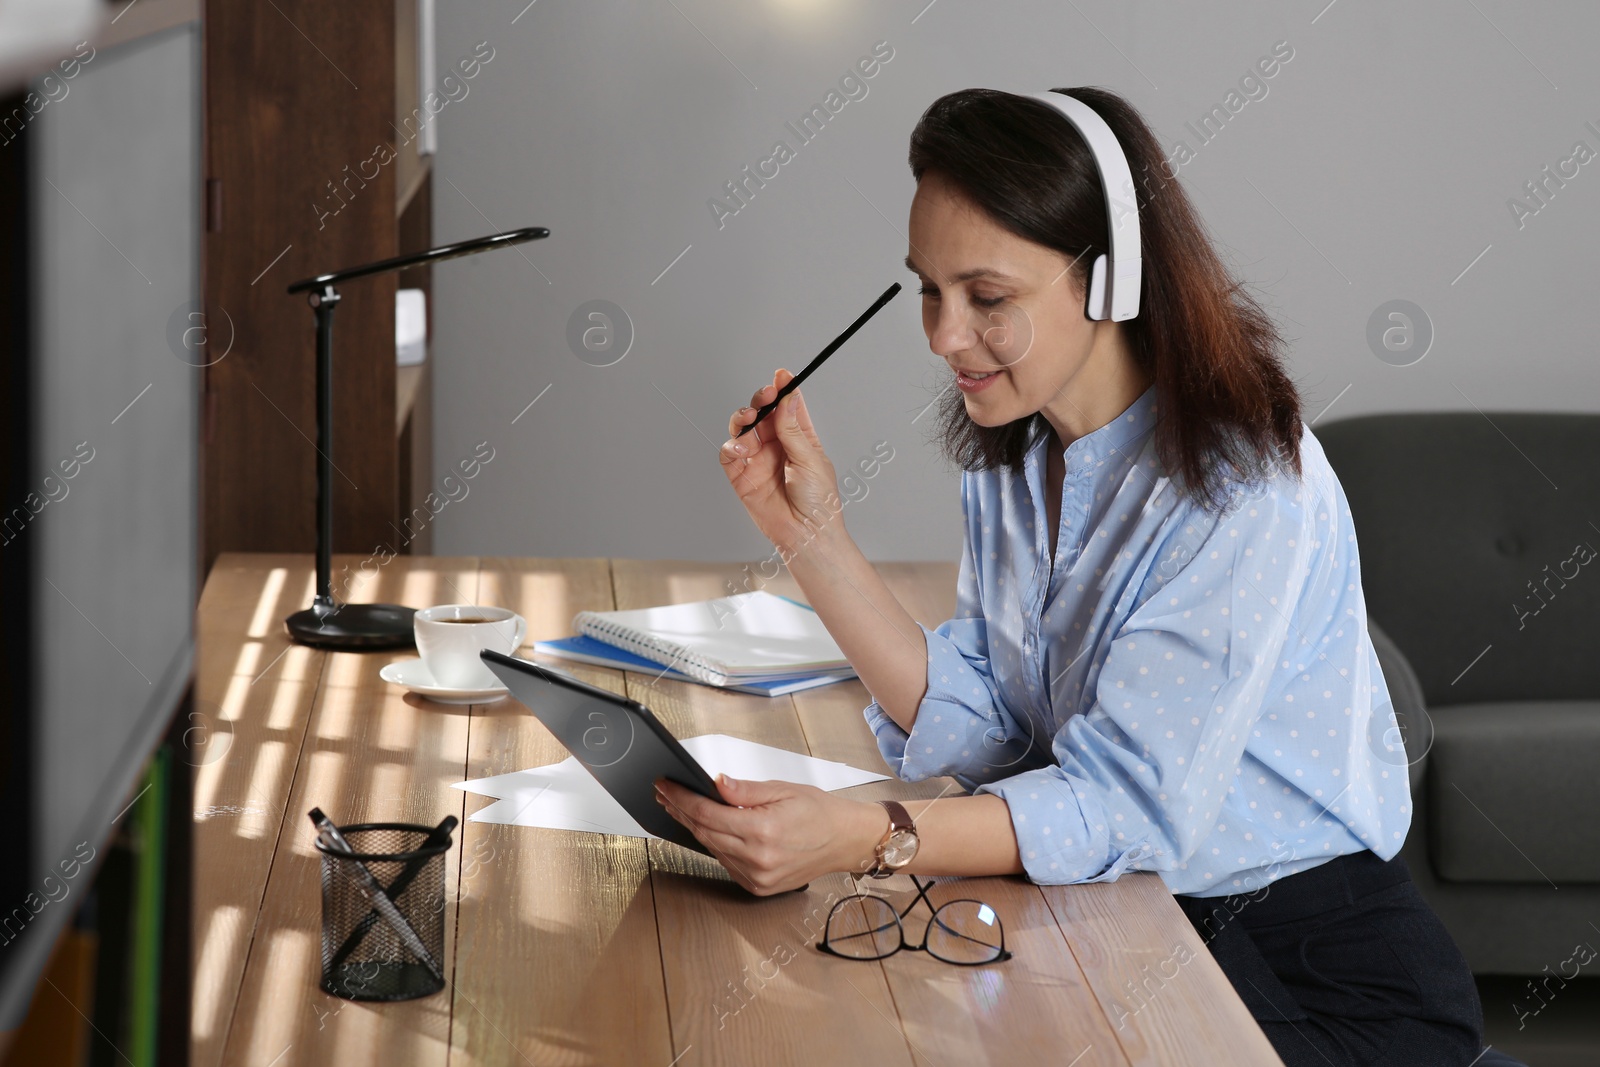 Photo of Woman with modern tablet and headphones learning at table indoors